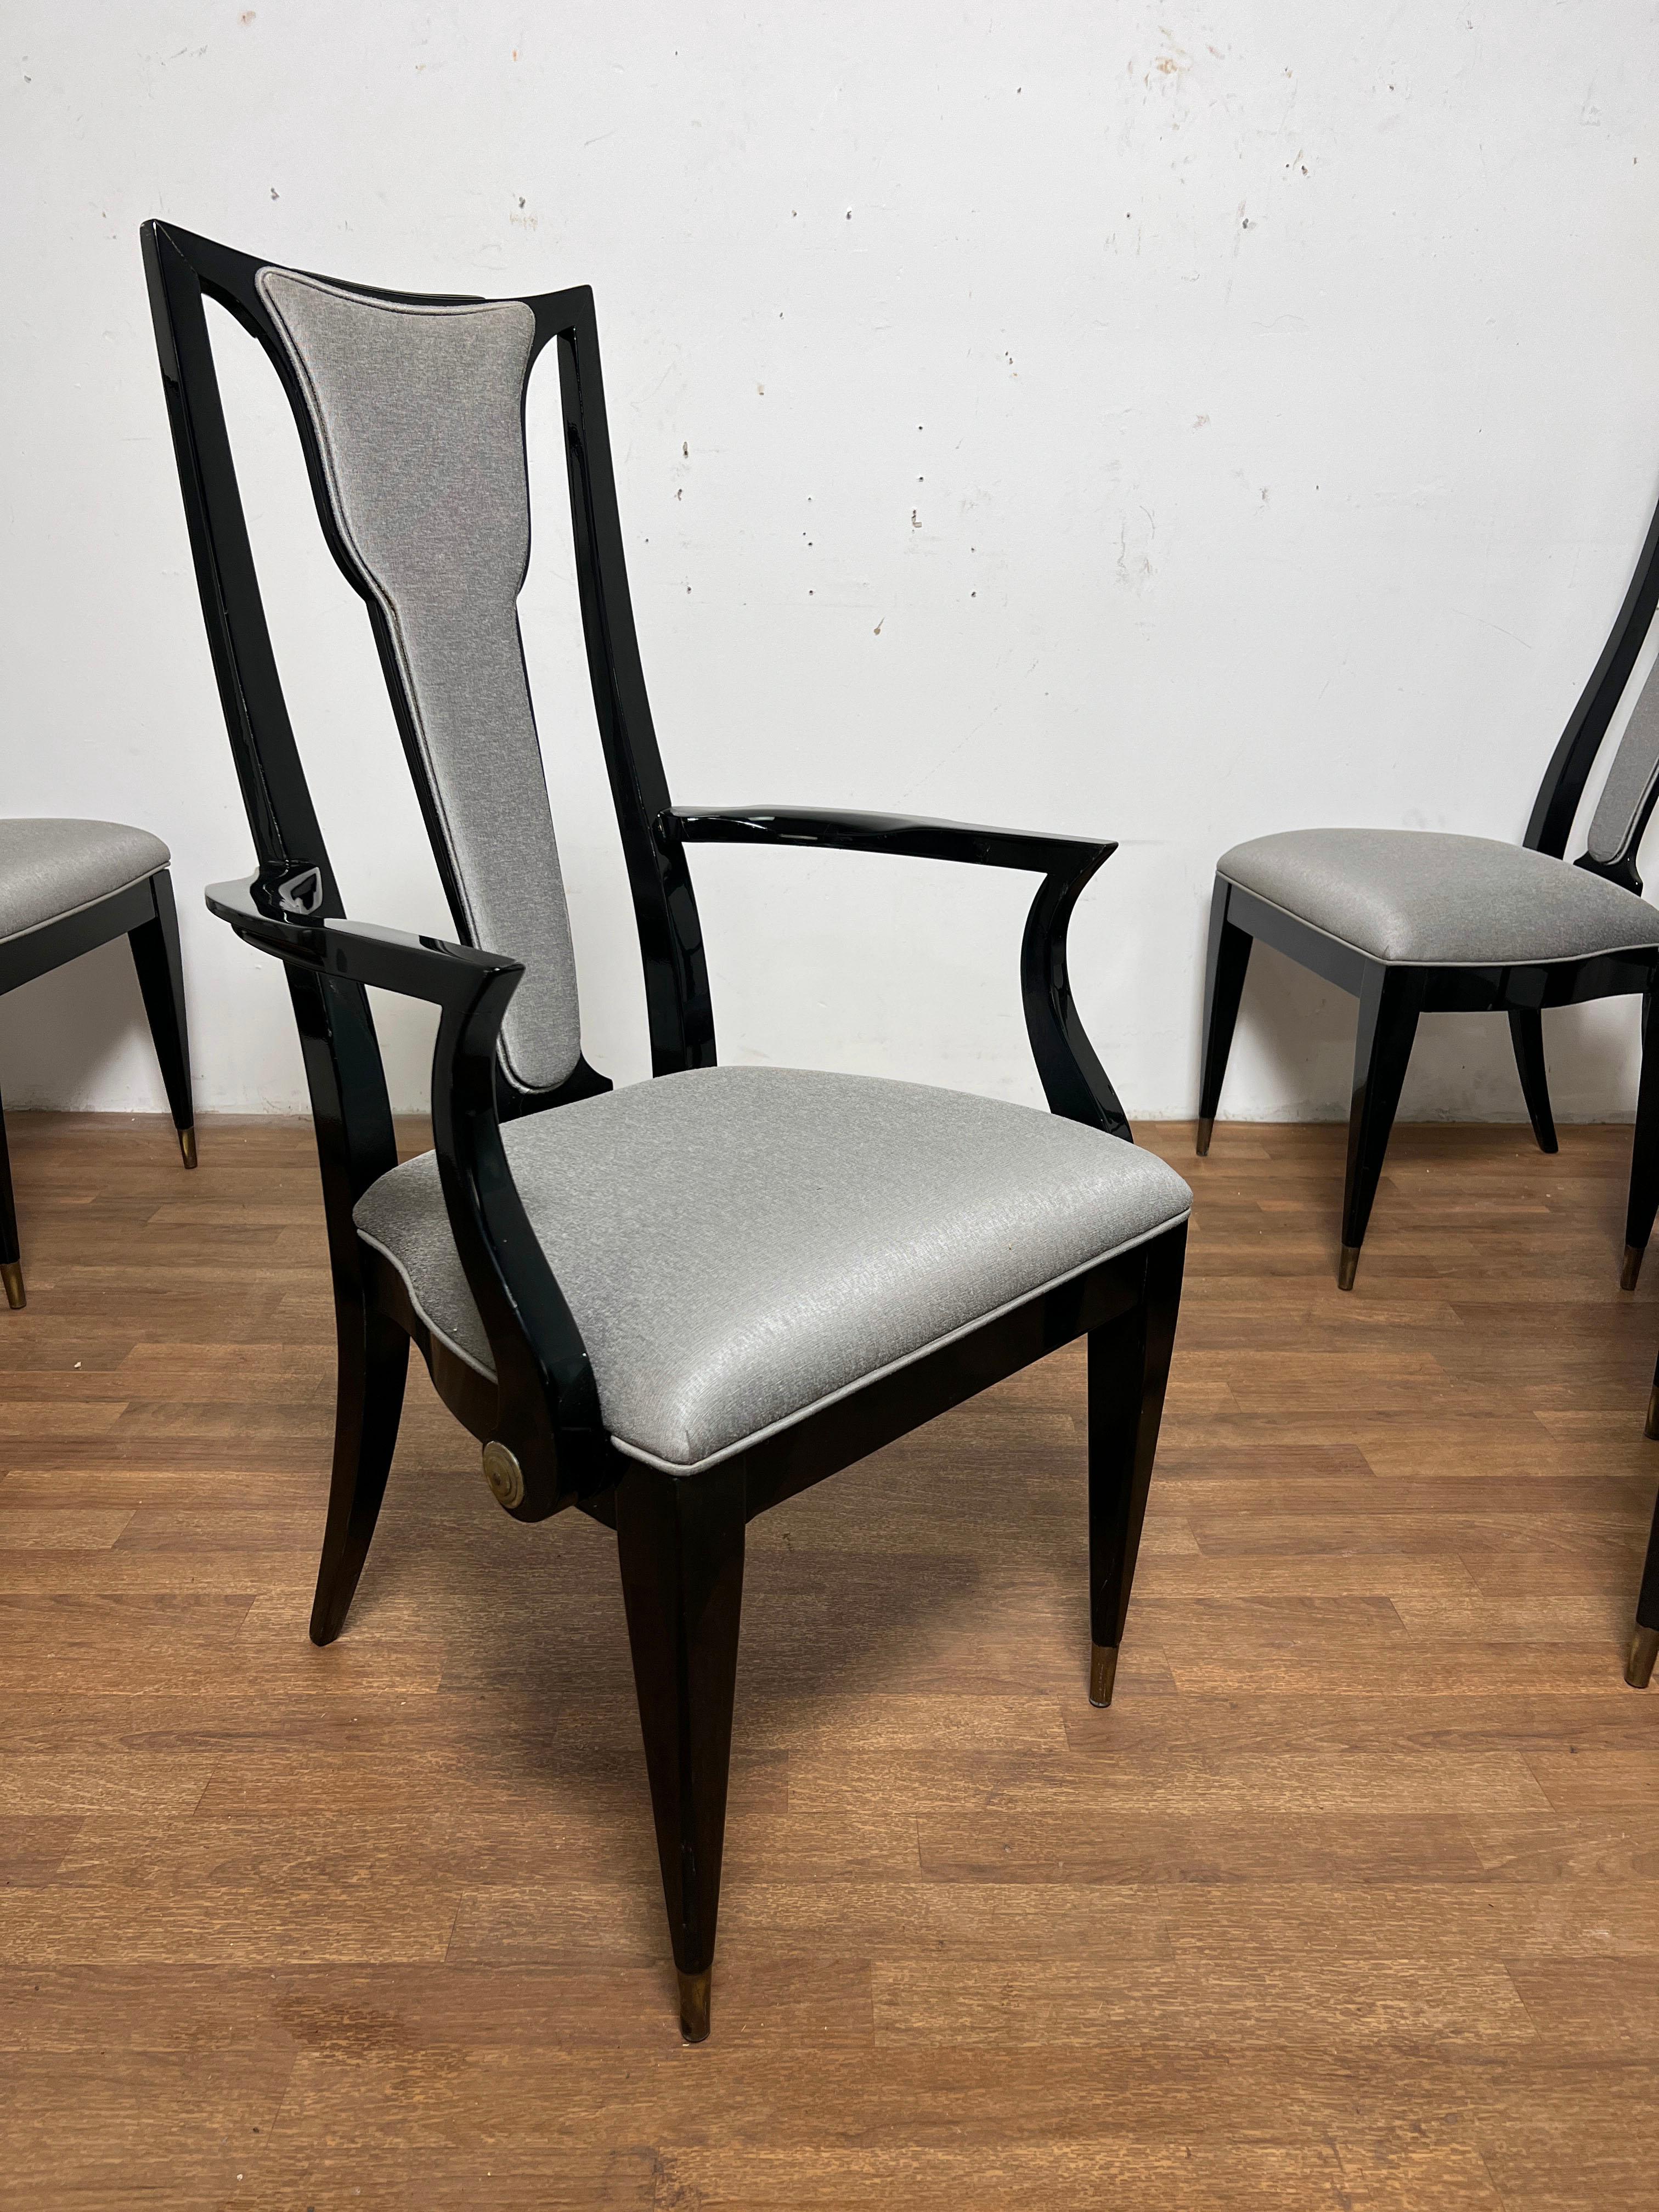 Set of six elegant high back dining chairs formerly placed in an interior designed by Ryan Korban in the early 2000s.  These stylish 21st century mid-century revival chairs have an Italian influence reminiscent of the designs of Borsani, Molino or